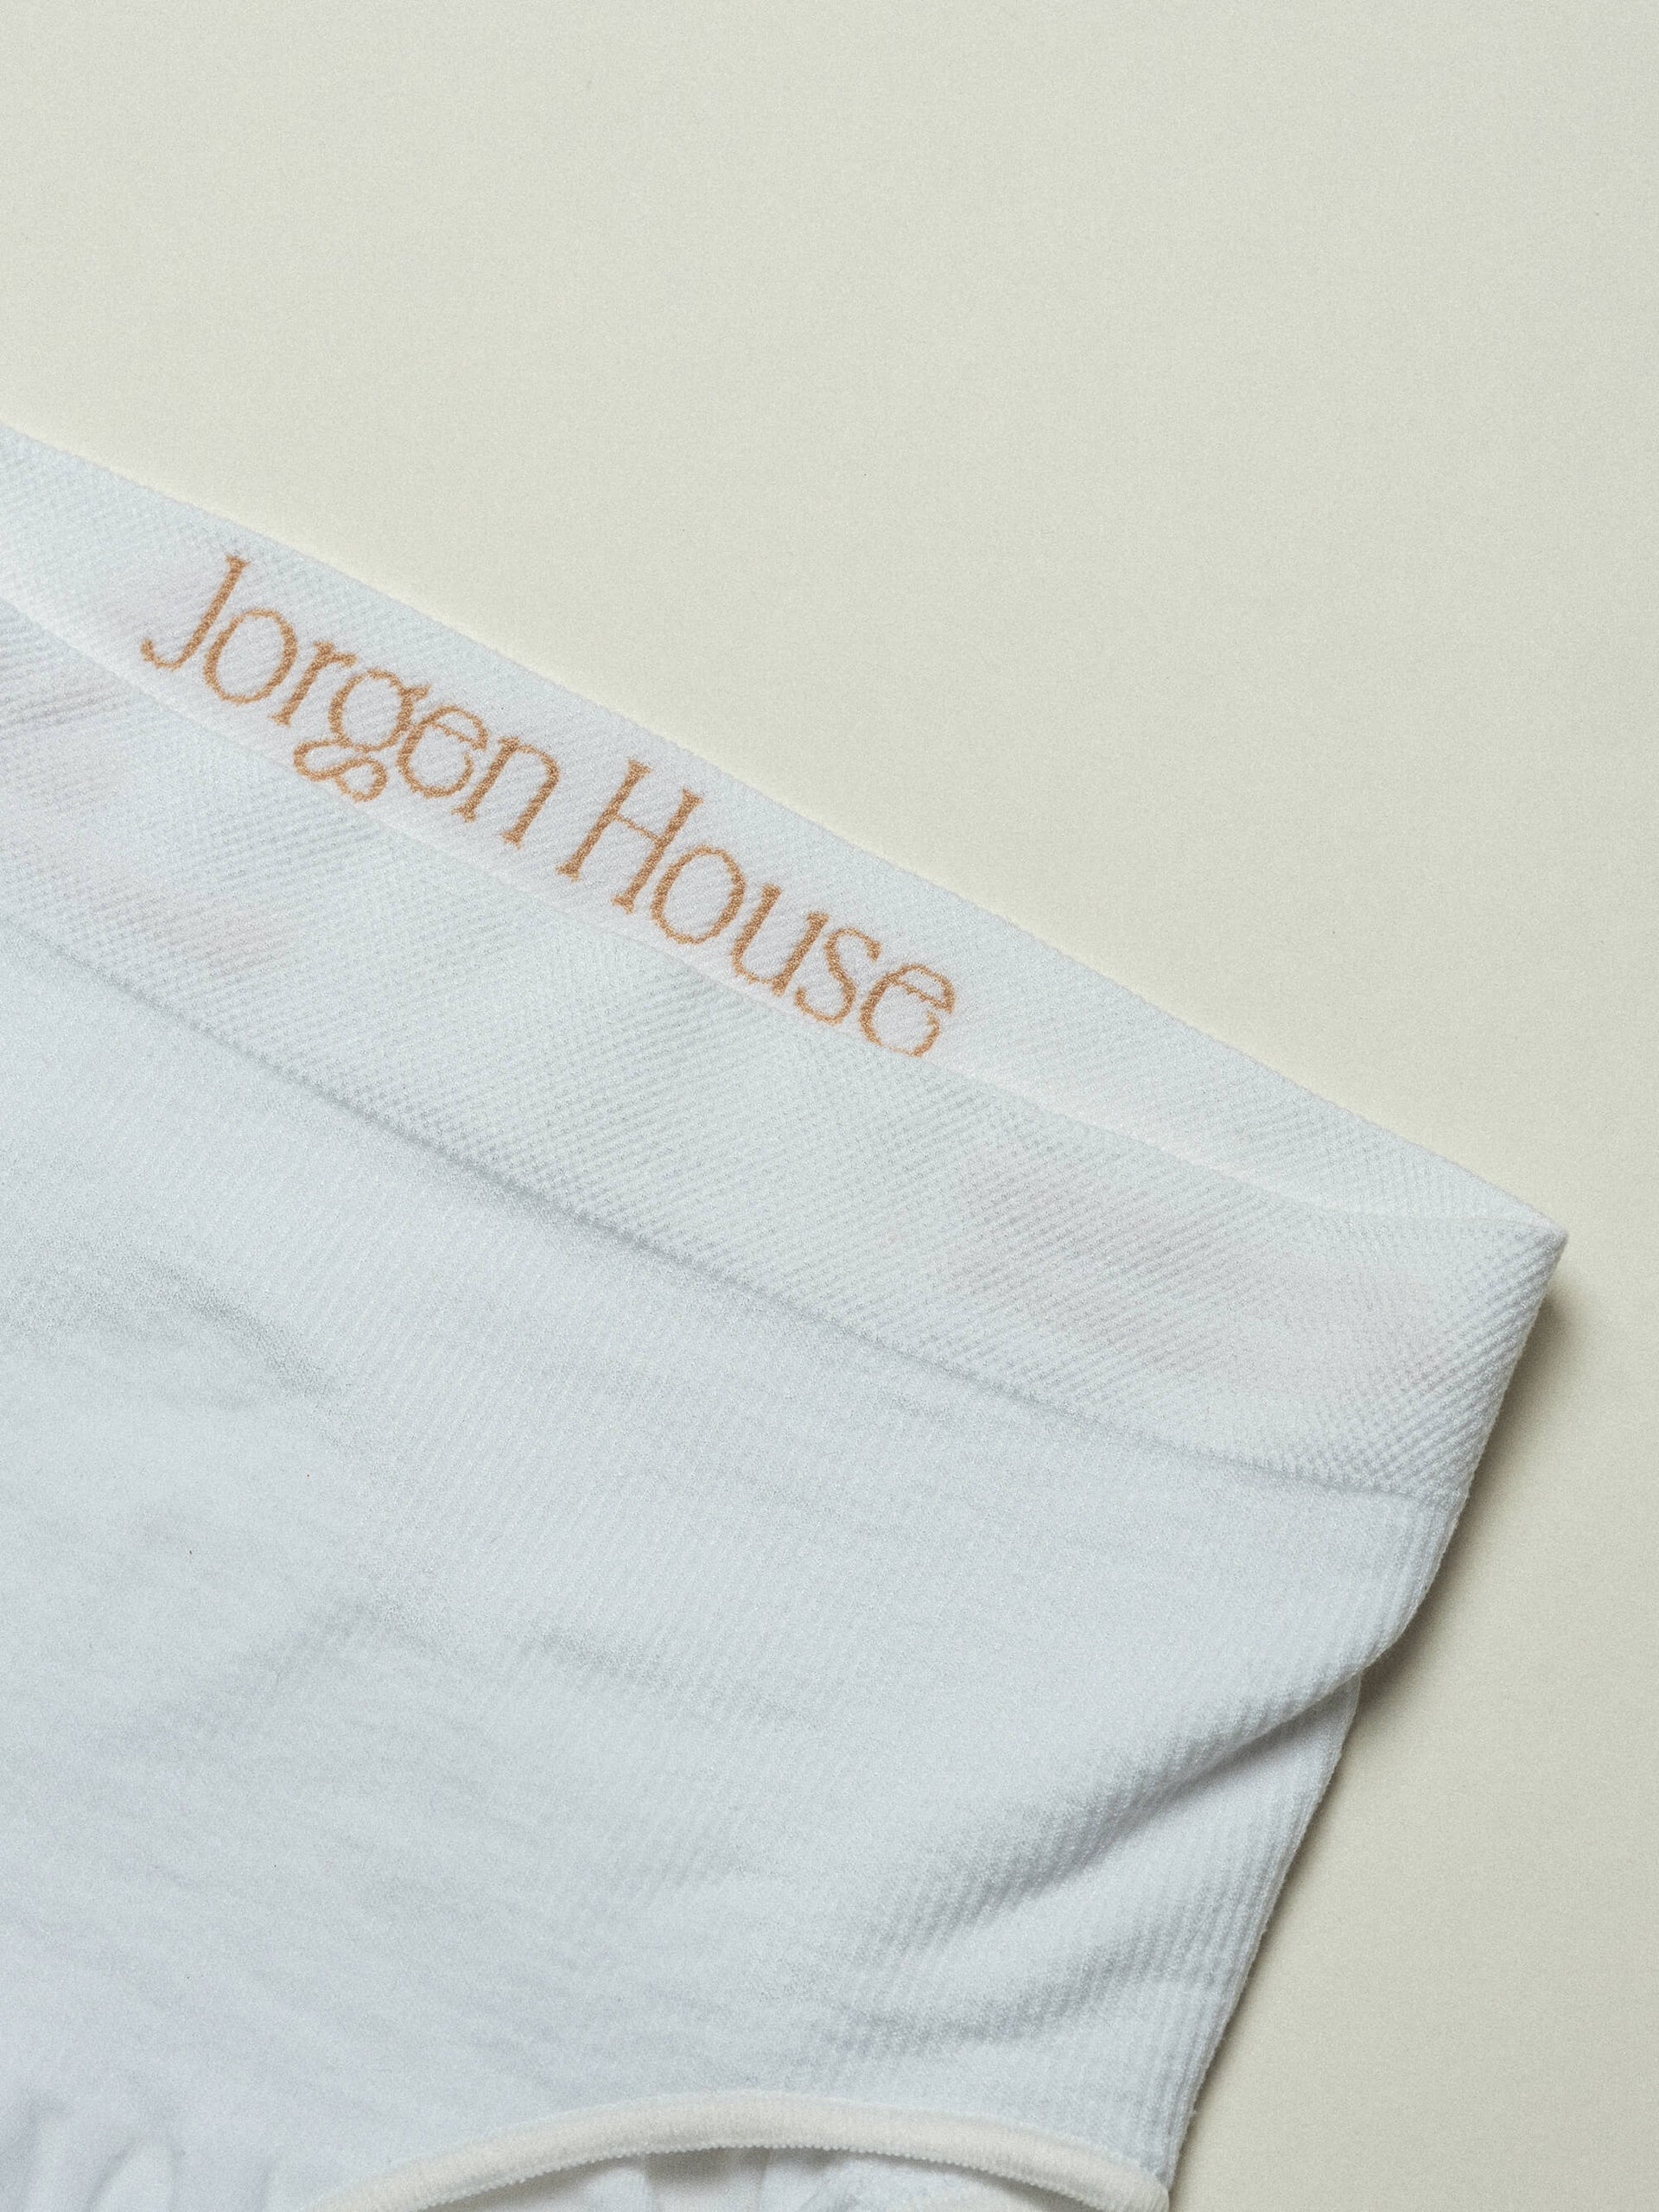 Jorgen House close up image of white support briefs